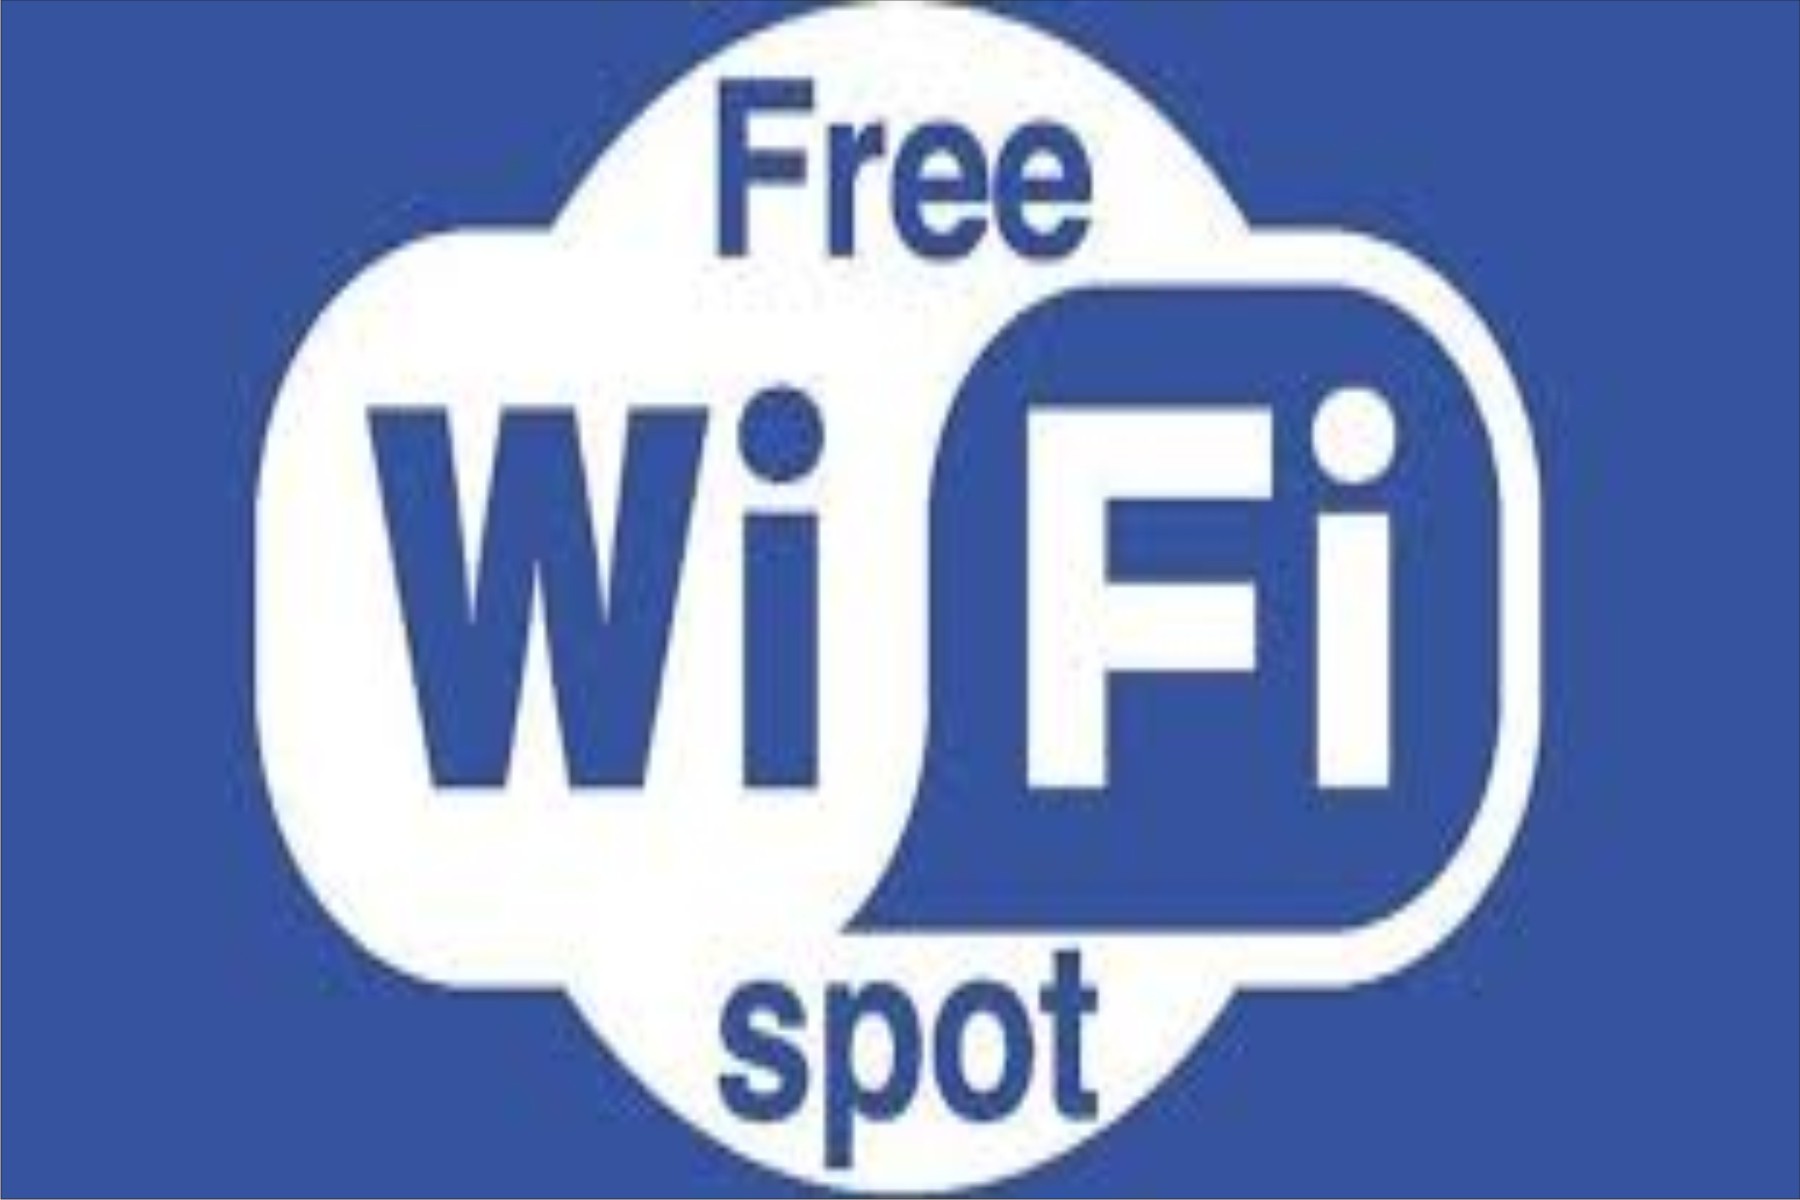 Thousand public locations to get free Wi-Fi